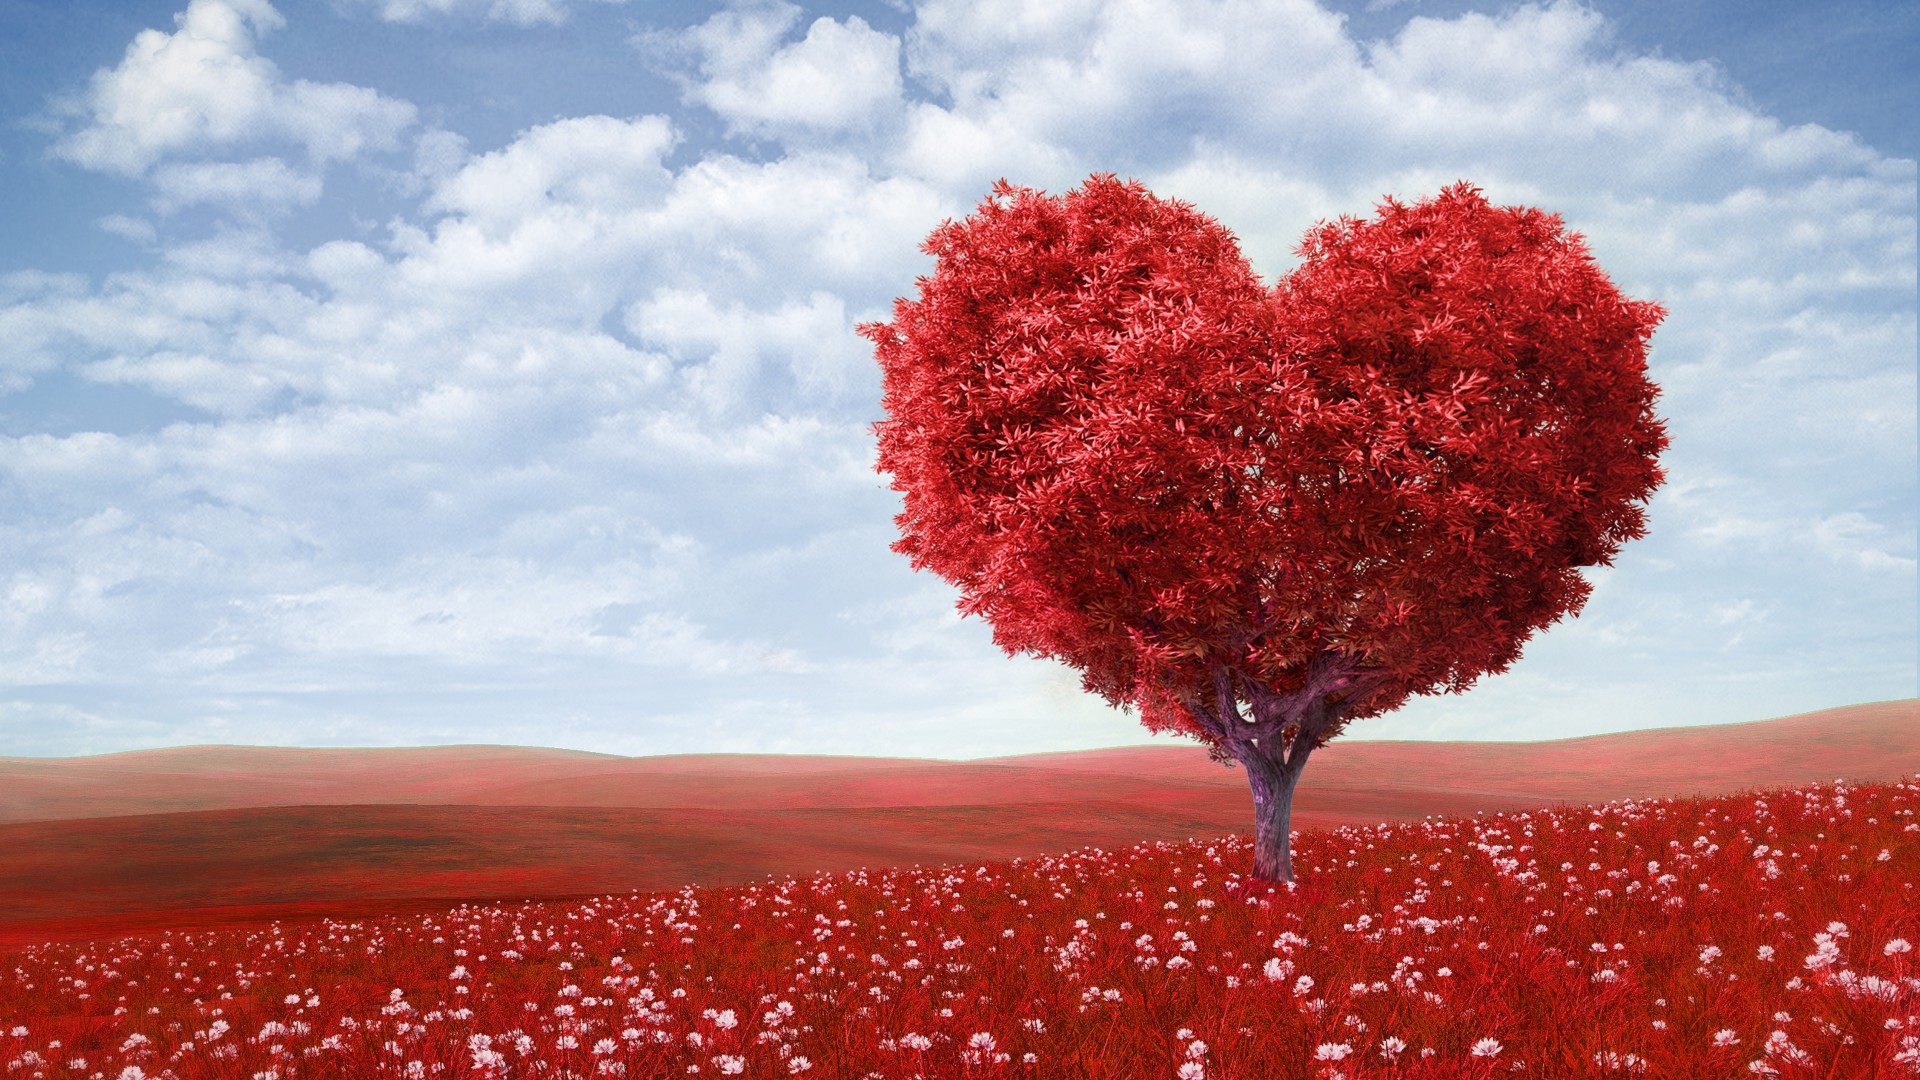 valentineand039s, Day, Love, Romance, Mood, Emotion, Heart, Trees, Landscapes, Fields, Flowers, Leaves Wallpaper